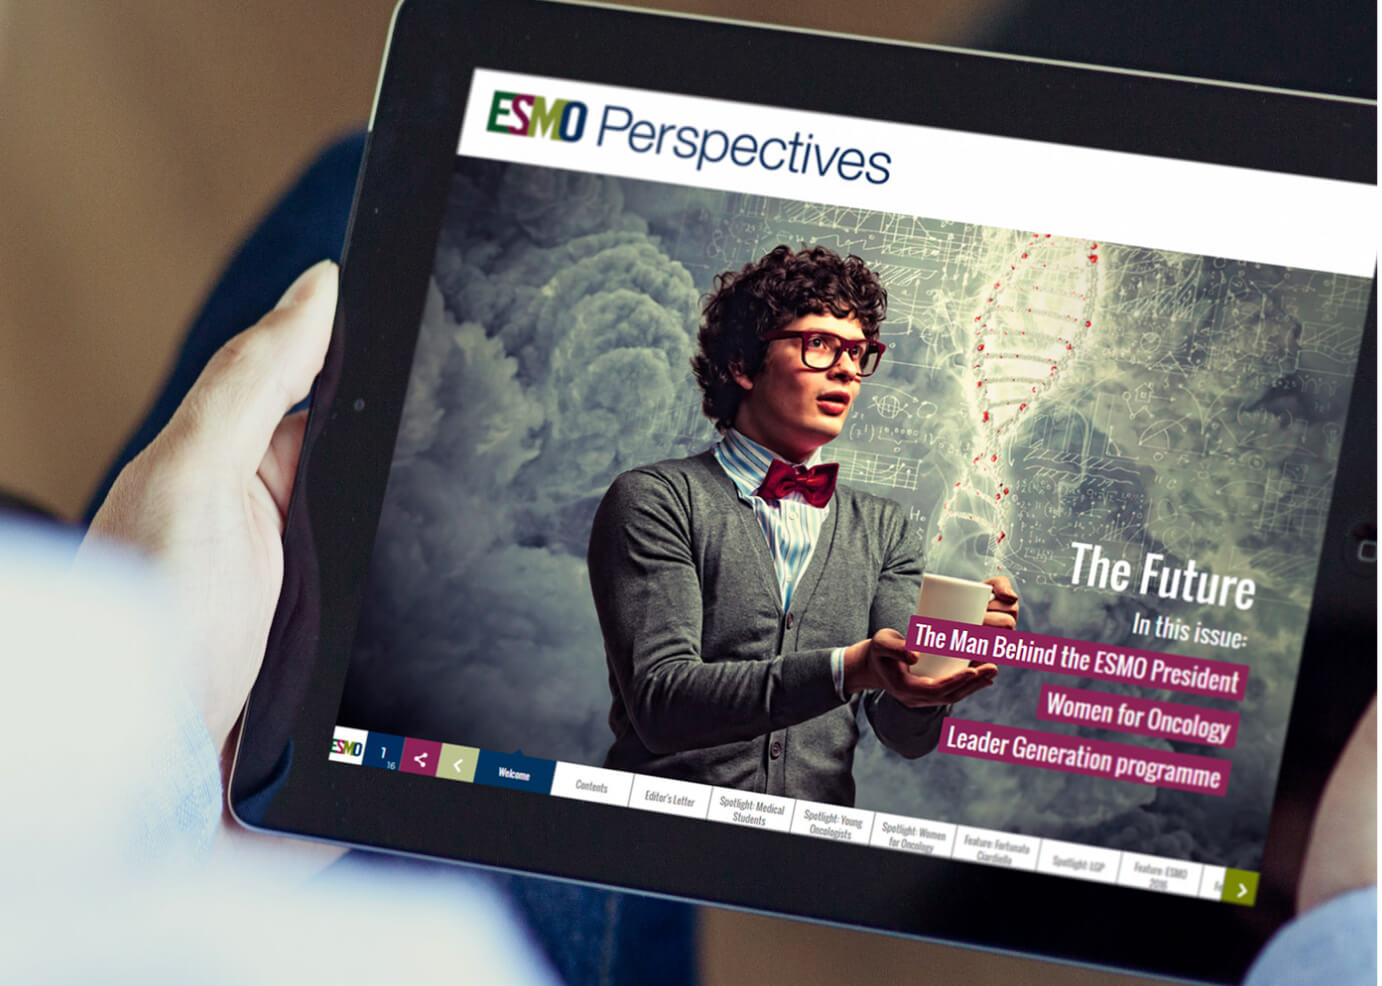 ESMO perspectives homepage on Ipad digital content